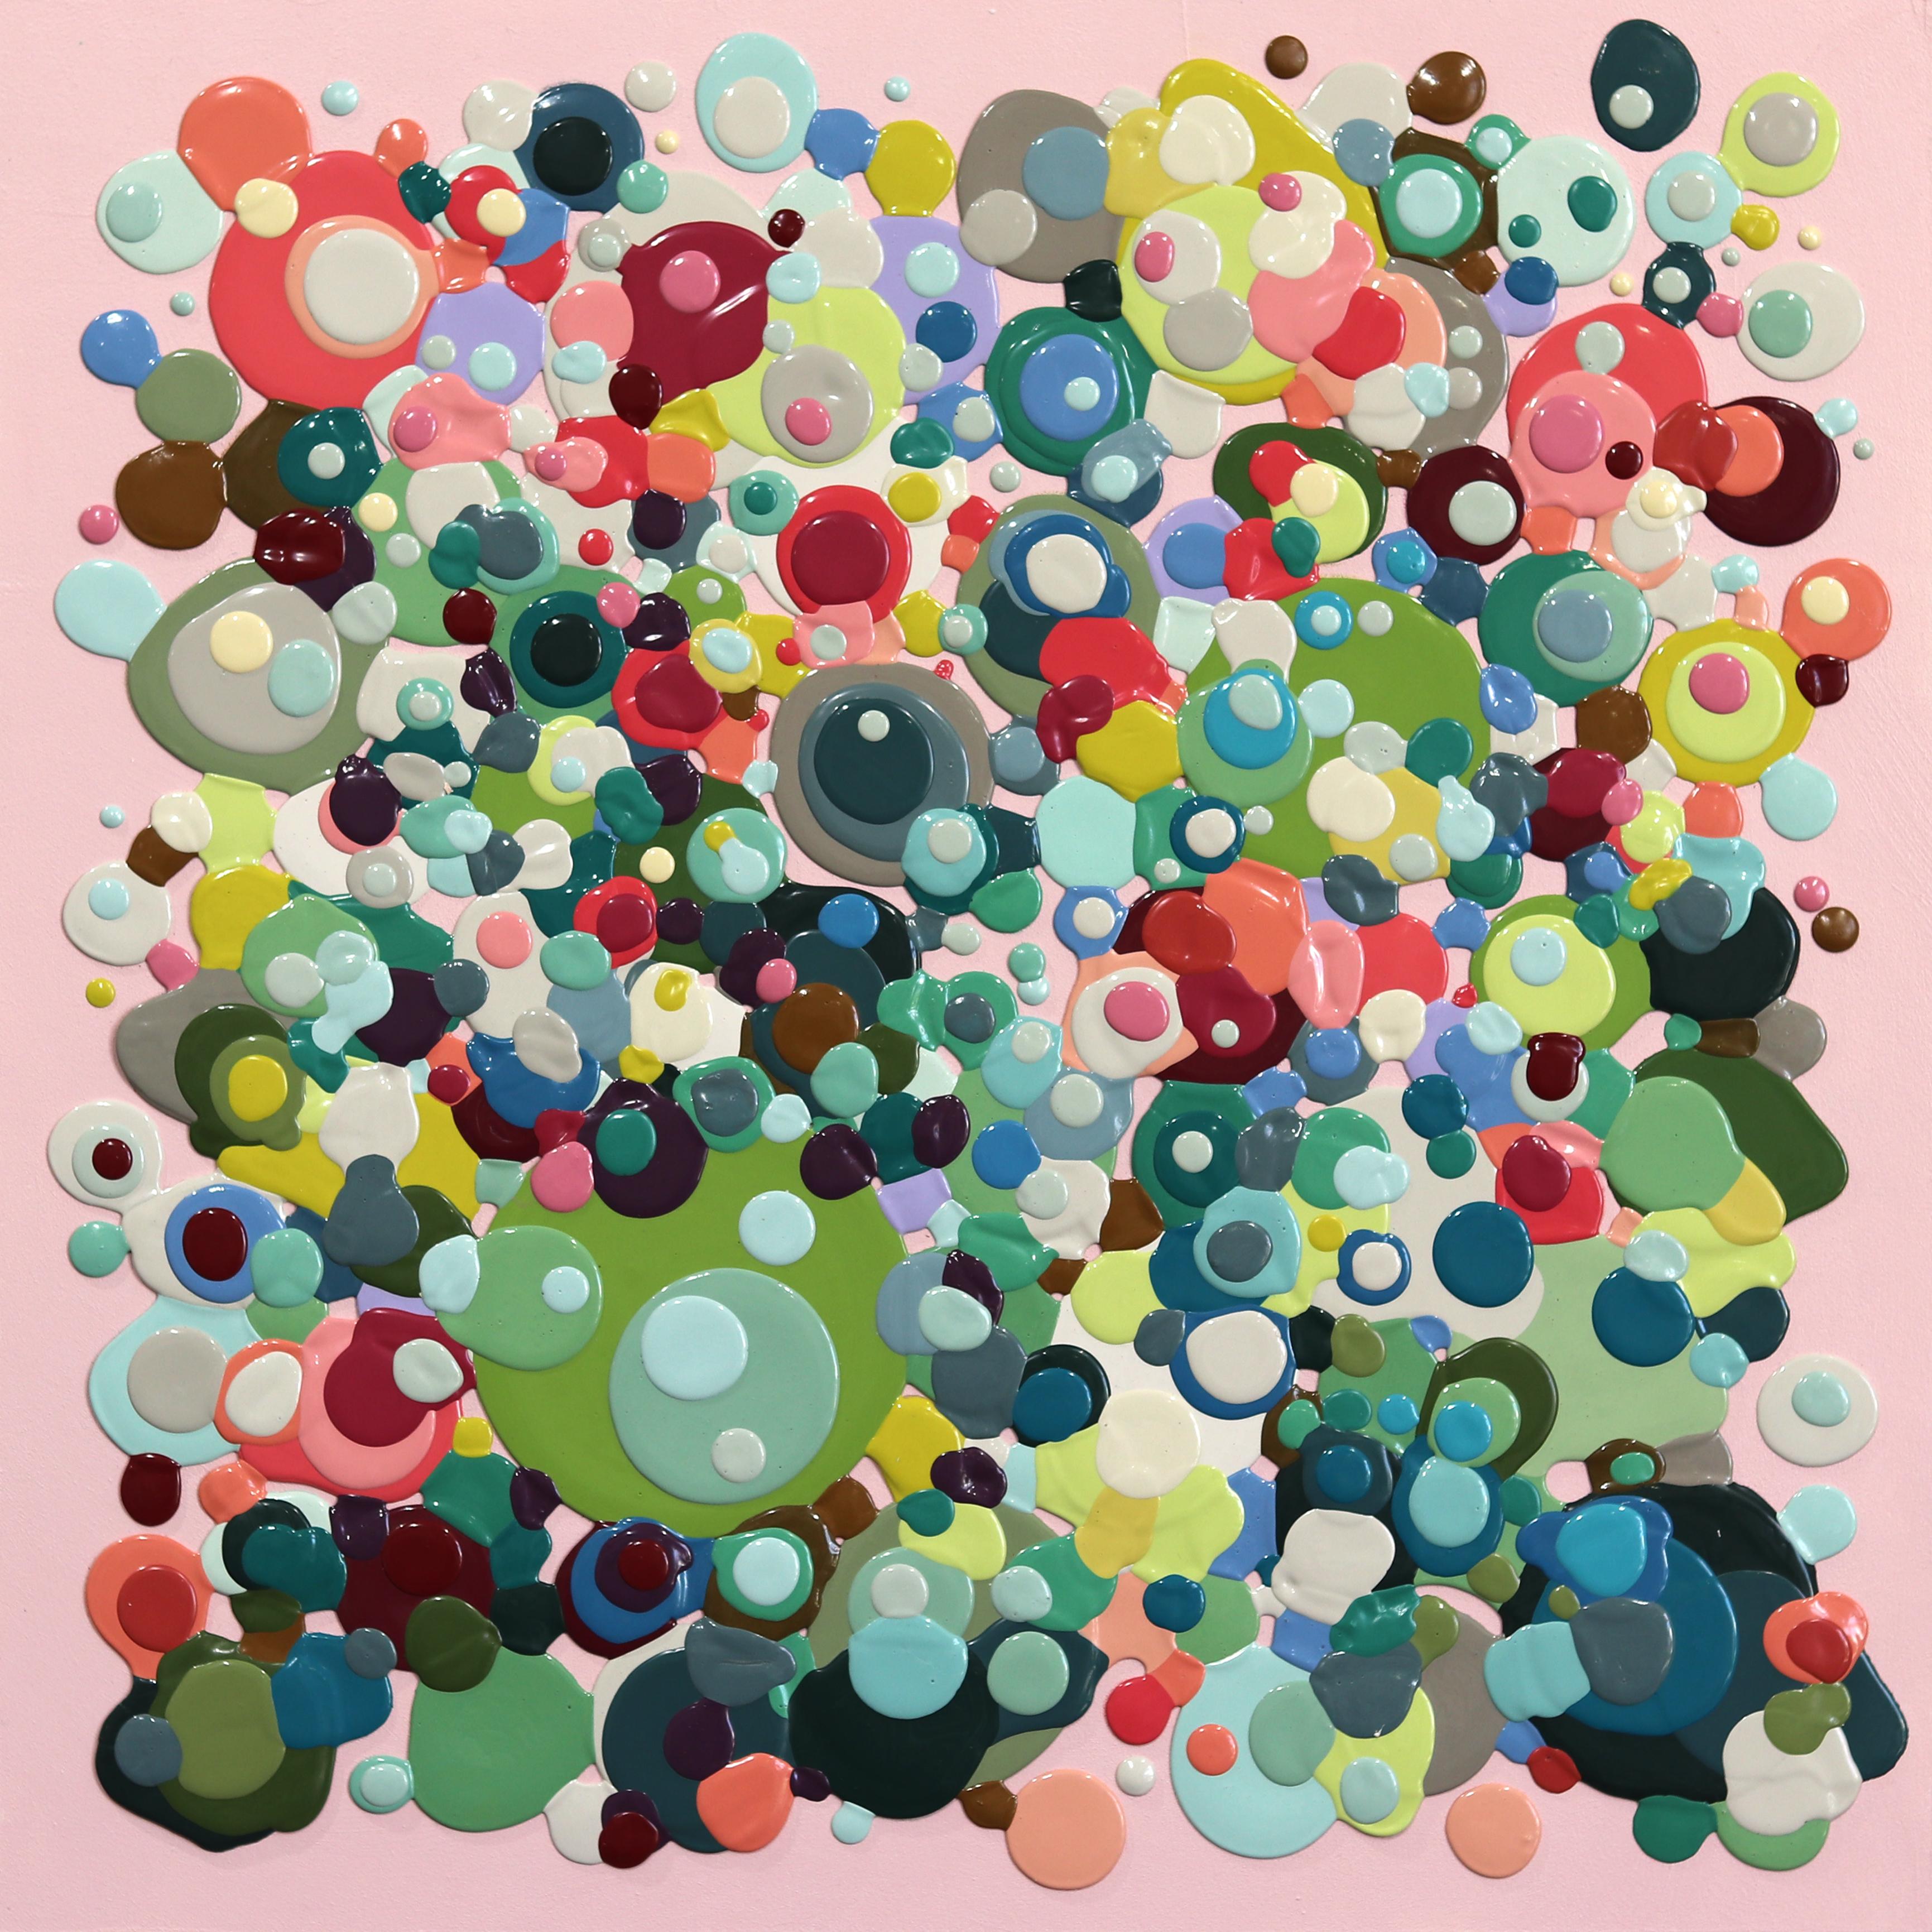 My Grandpa Was A Toy Salesman - Saturated Paint Droplets by Kimberly Blackstock